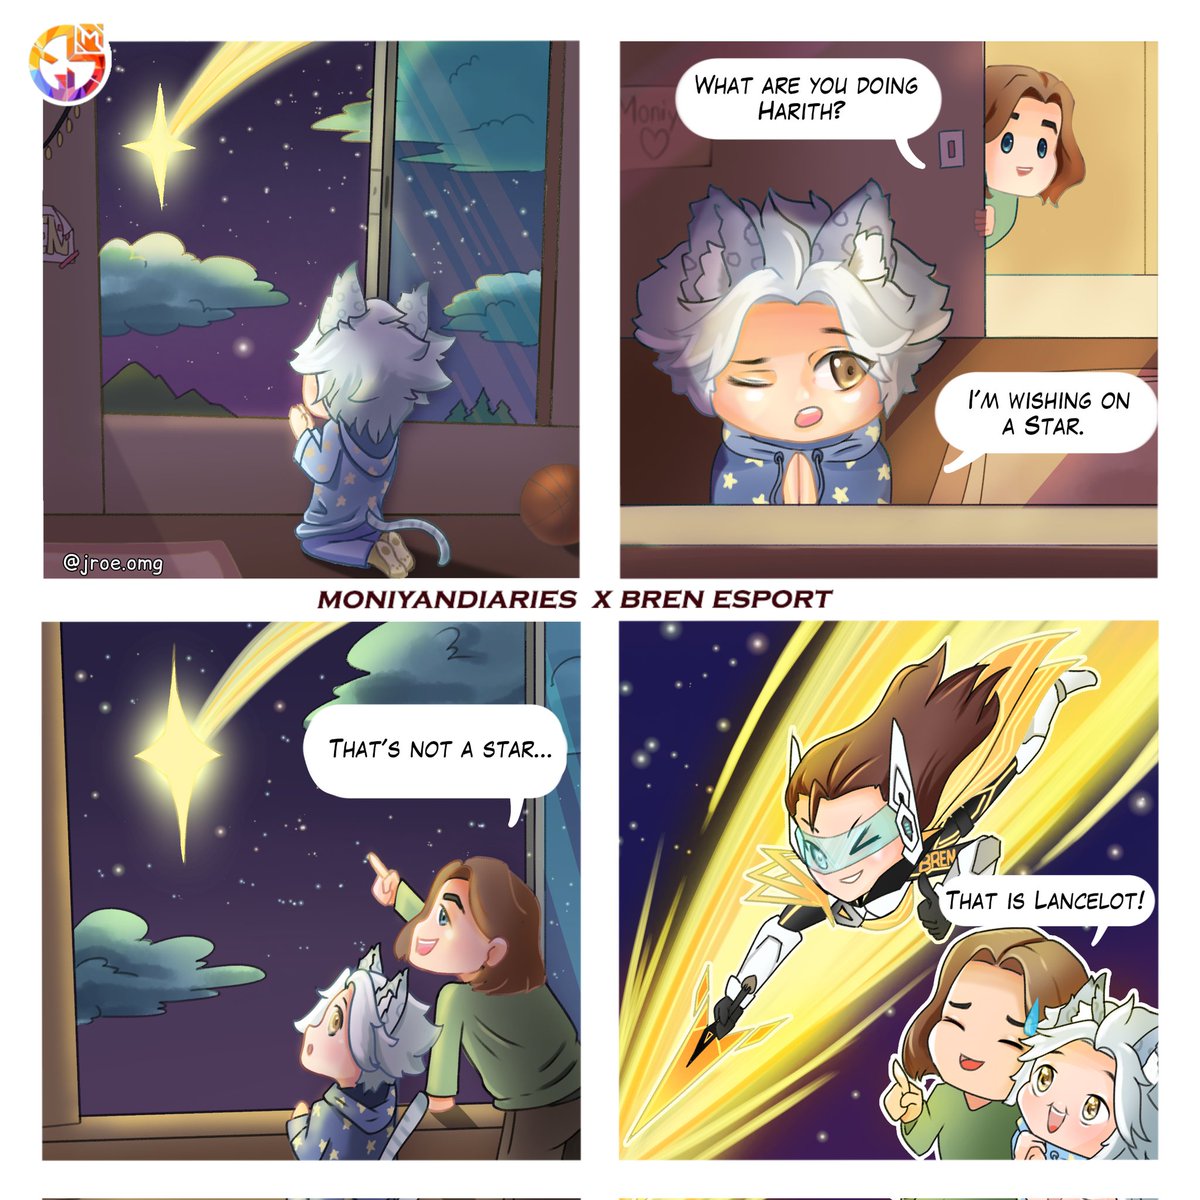 😯A Wishing Star?🌟

🎨 MGL Artist @ jroe. omg
✏MGL Writer @cheol_apple

✨Go to @moniyandiaries and see what funny things happened there. 👉 instagram.com/moniyandiaries/

#moniyandiaries #mobilelegendsbangbang #mglmlbb #mlbbmgl